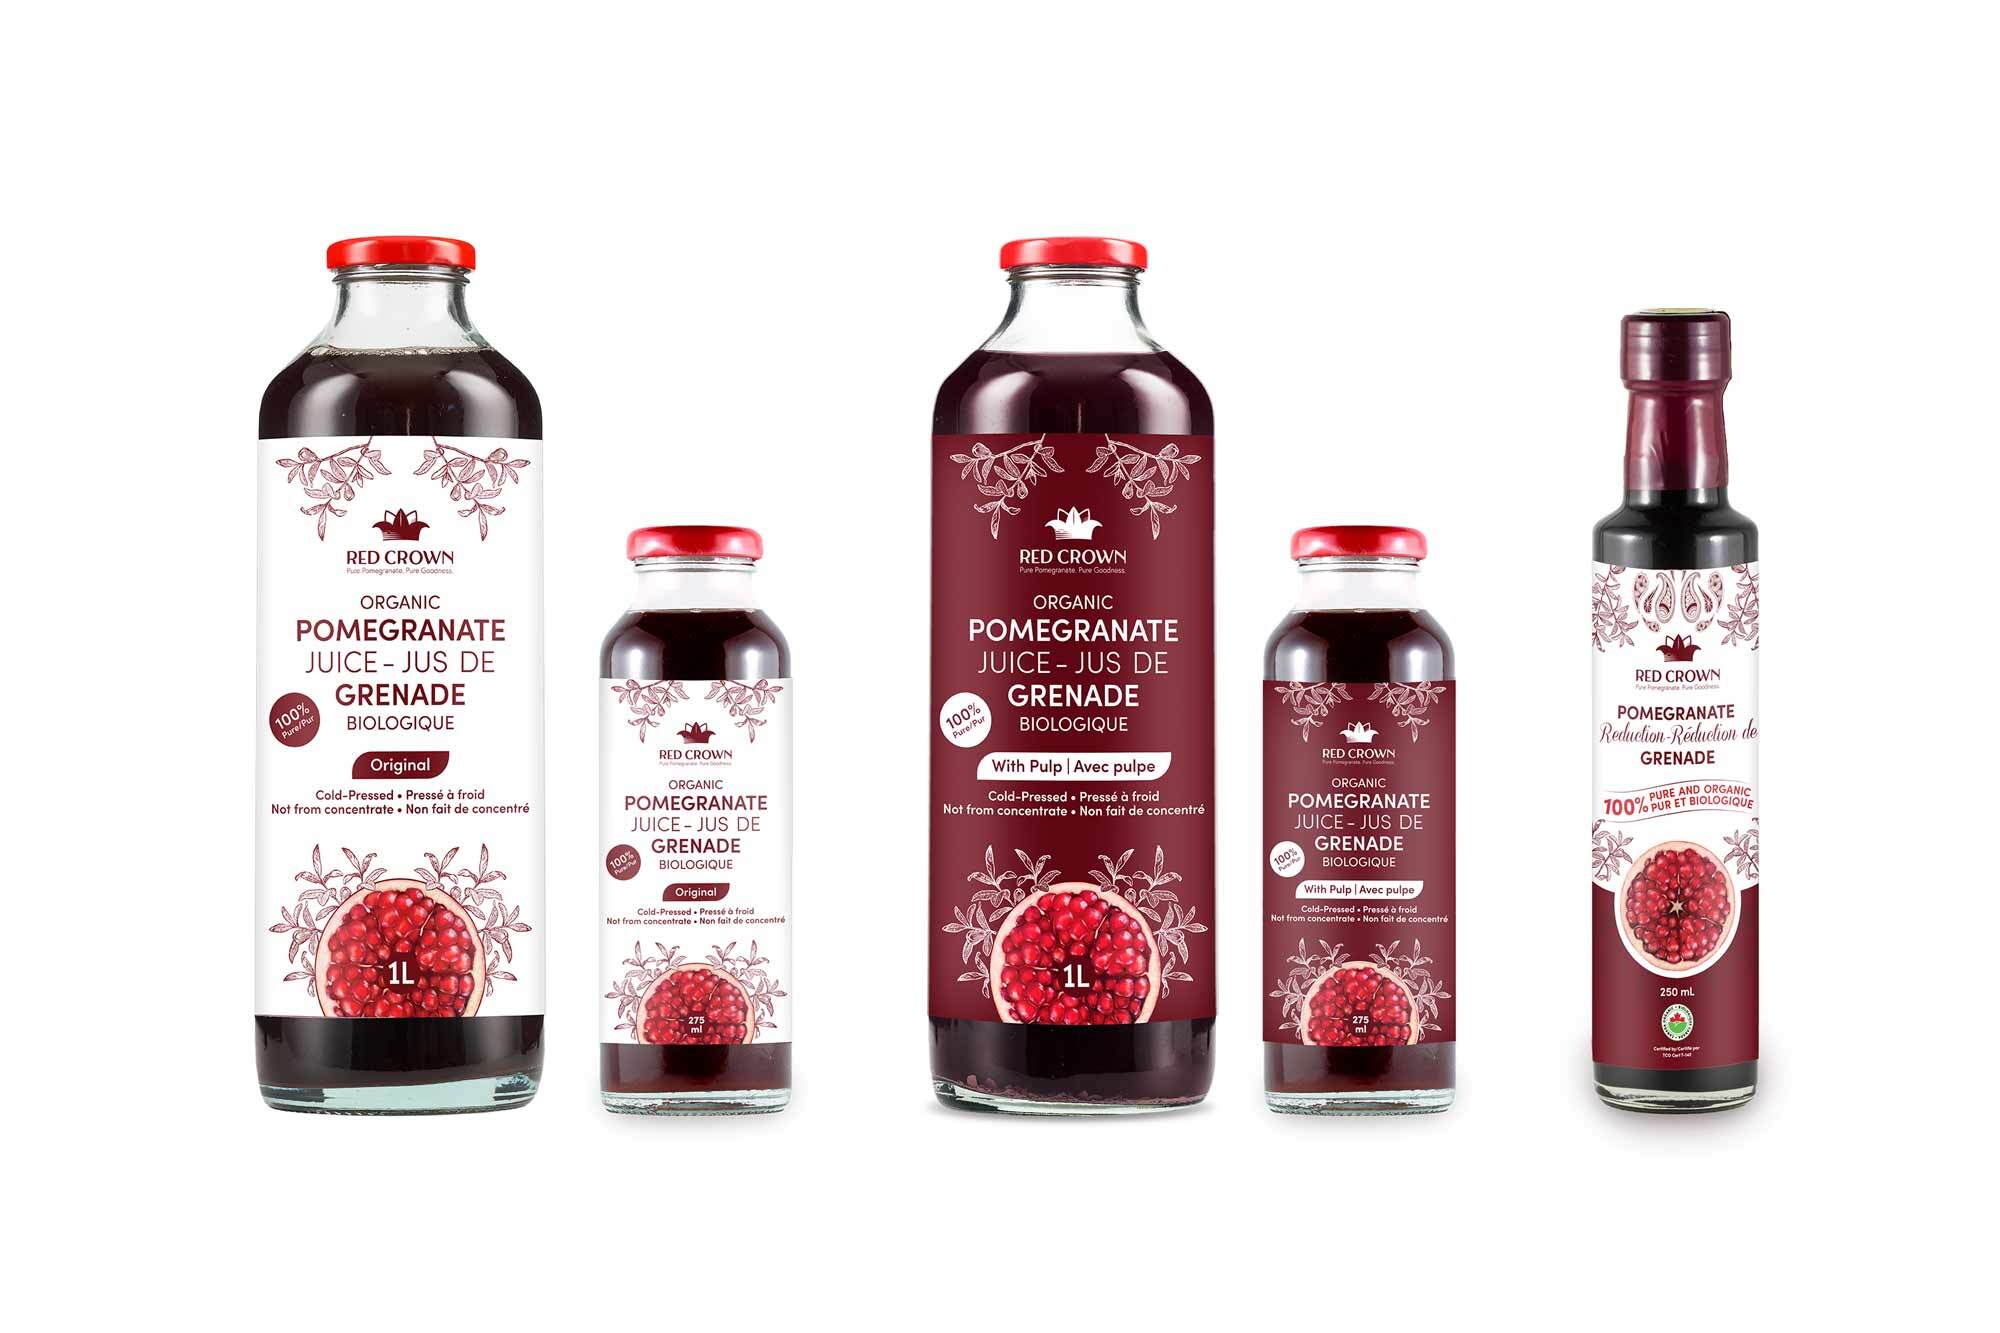 Red Crown Organic Pomegranate Juice Products